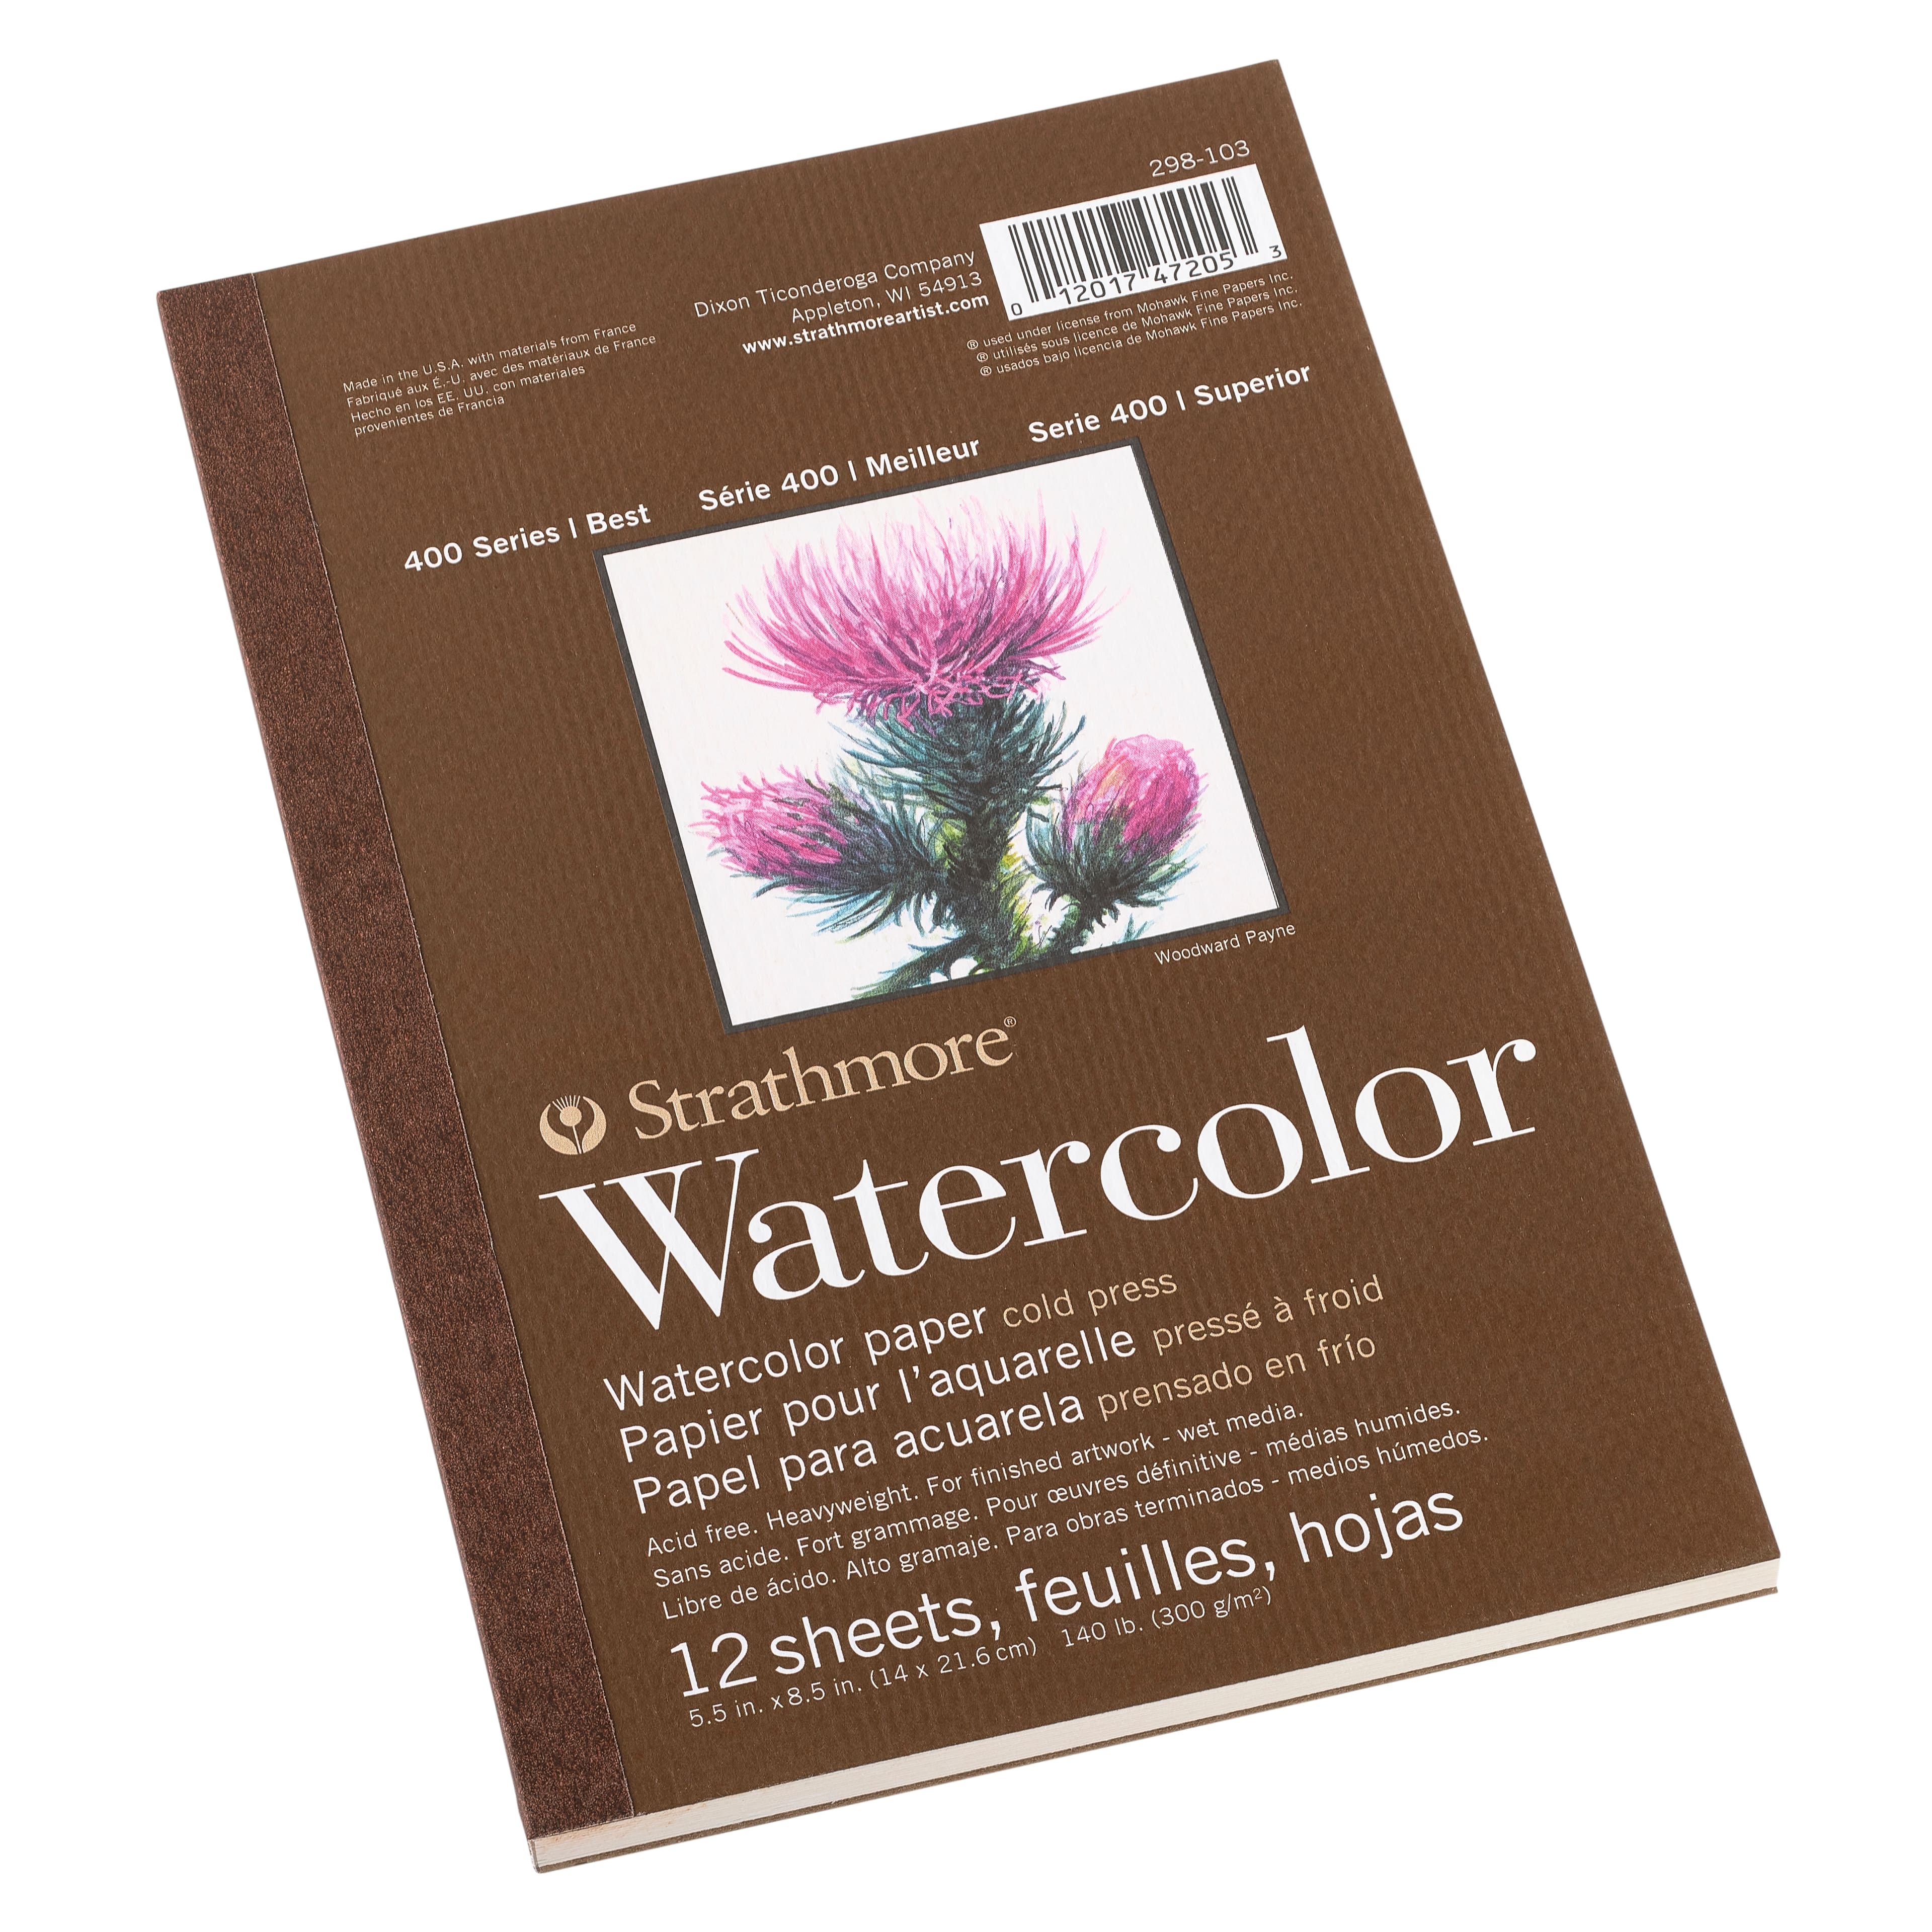 Black Hardcover Watercolor Book by Artist's Loft™, 5.5 x 8.5